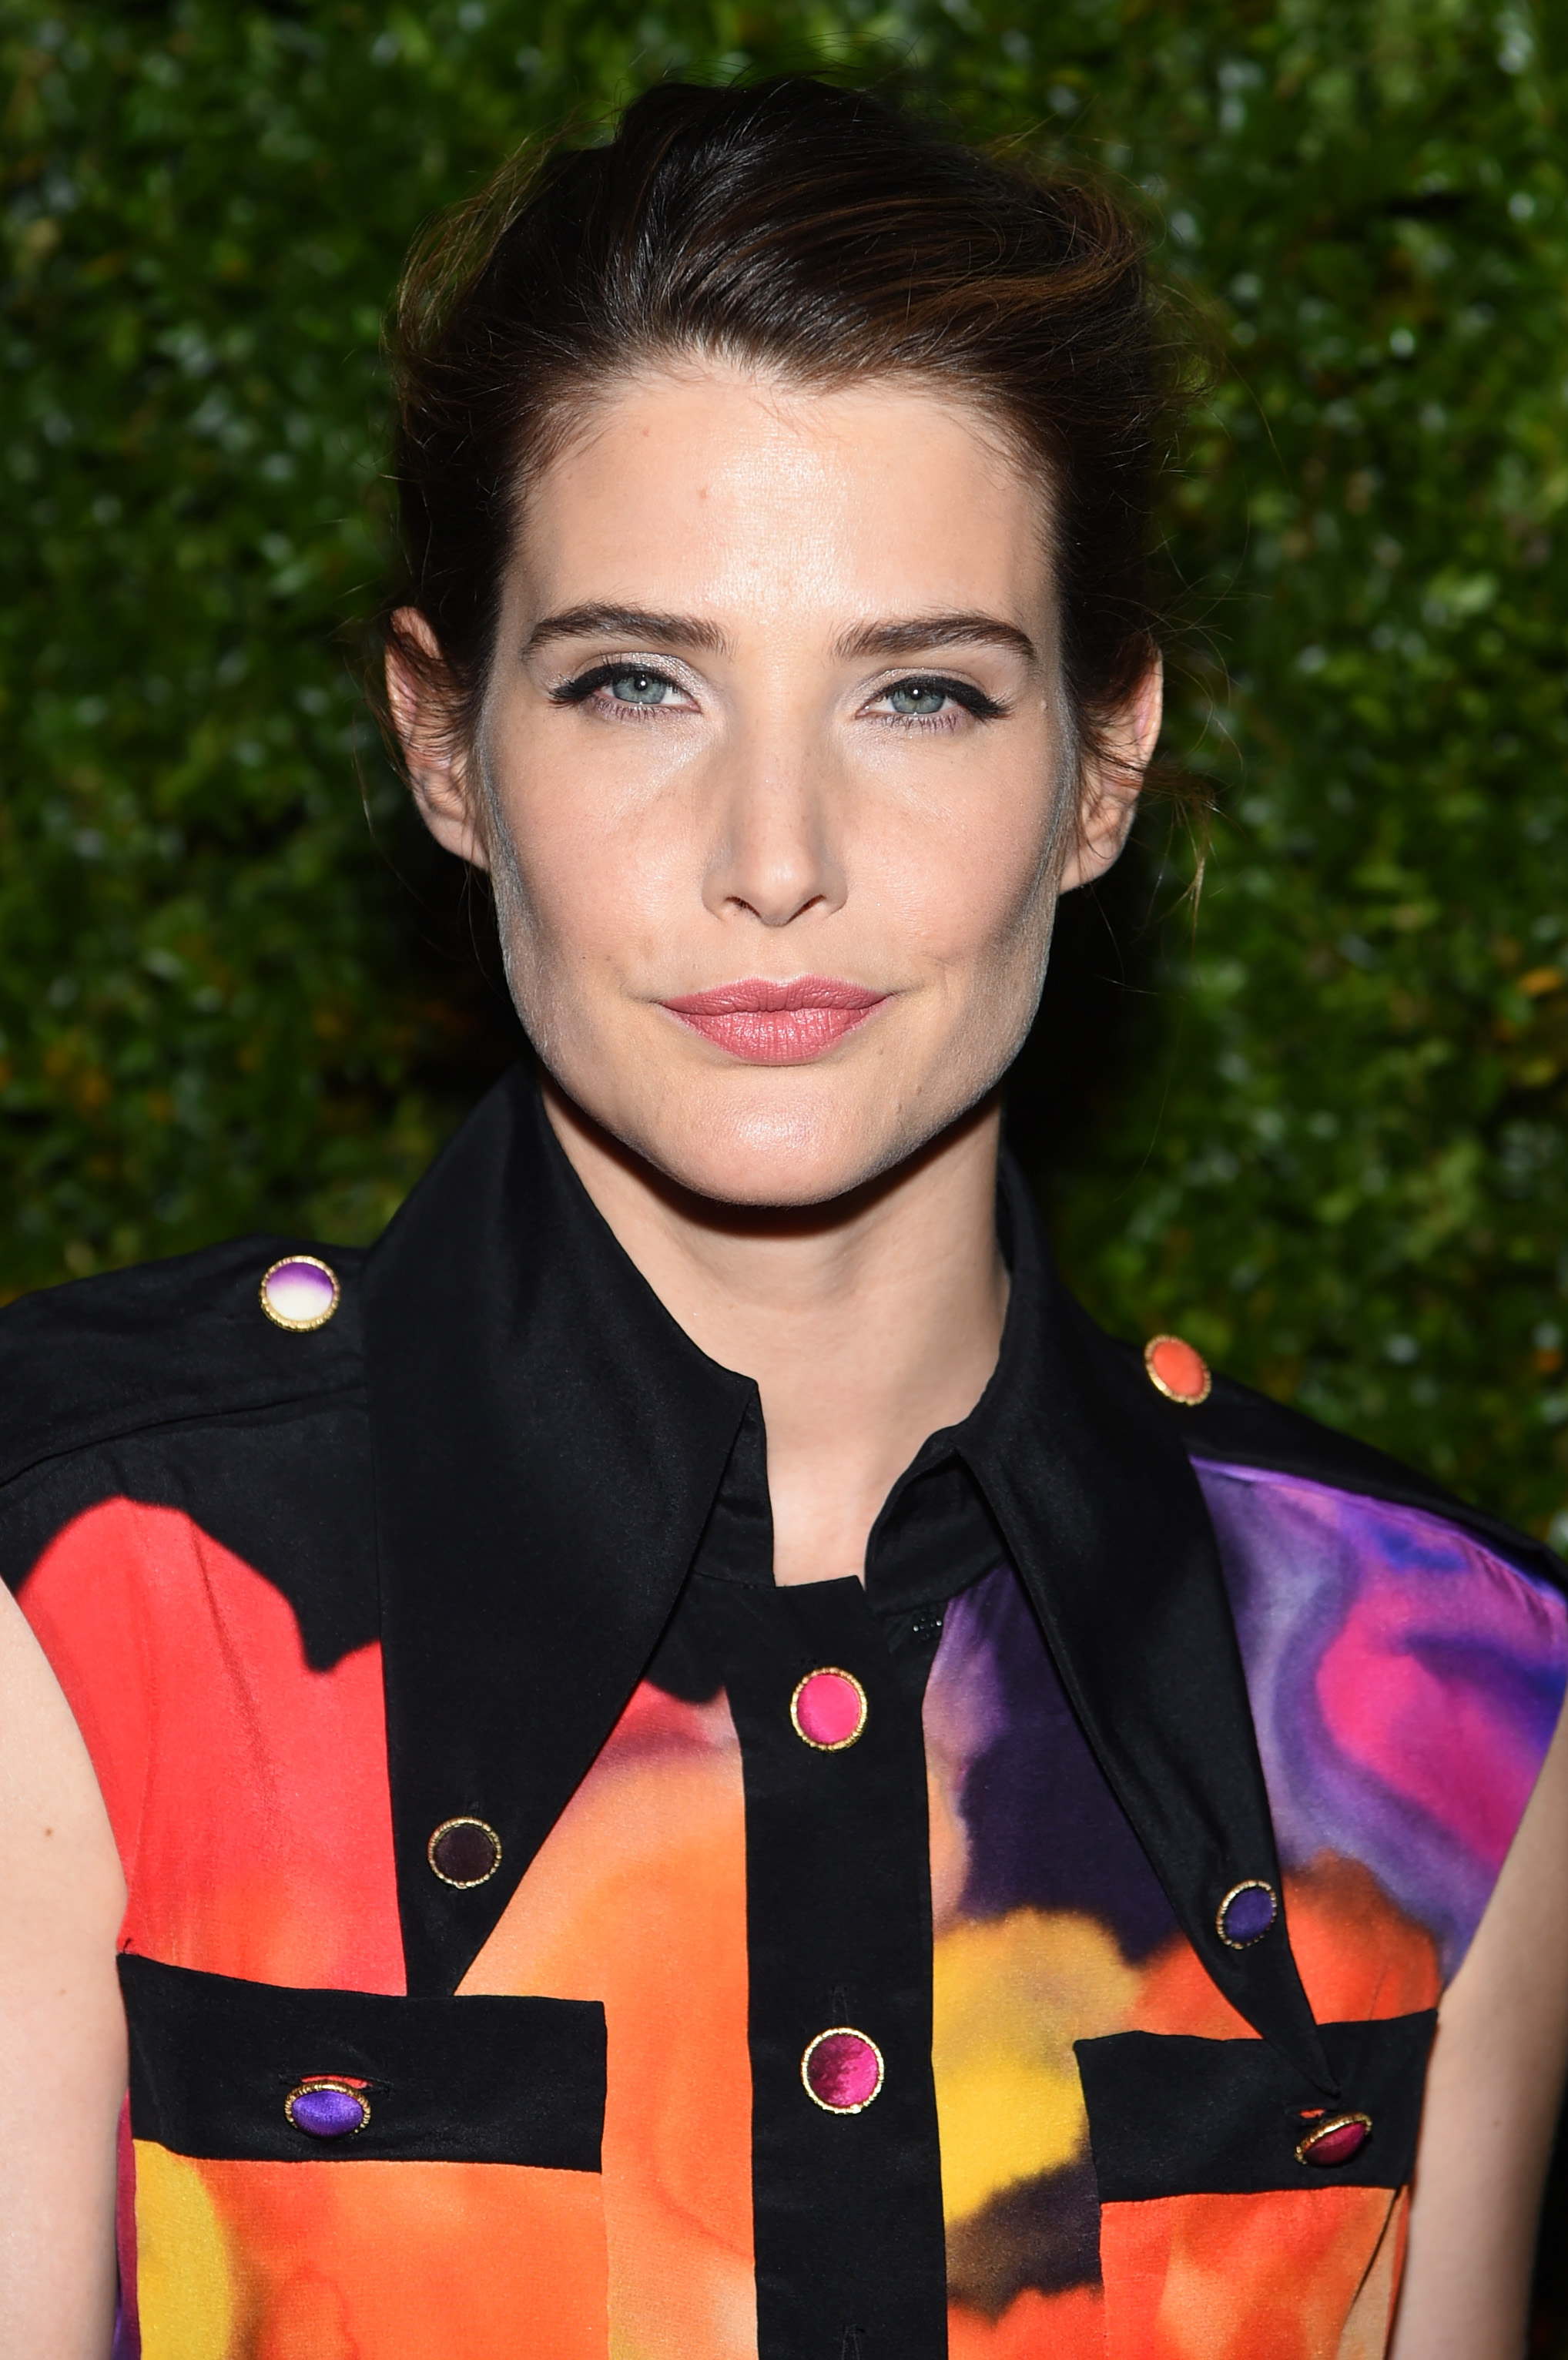 Cobie Smulders attends the Chanel Dinner during the 2015 Tribeca Film Festival at Balthazar on April 20, 2015 in New York City. (Jamie McCarth—Getty Images)